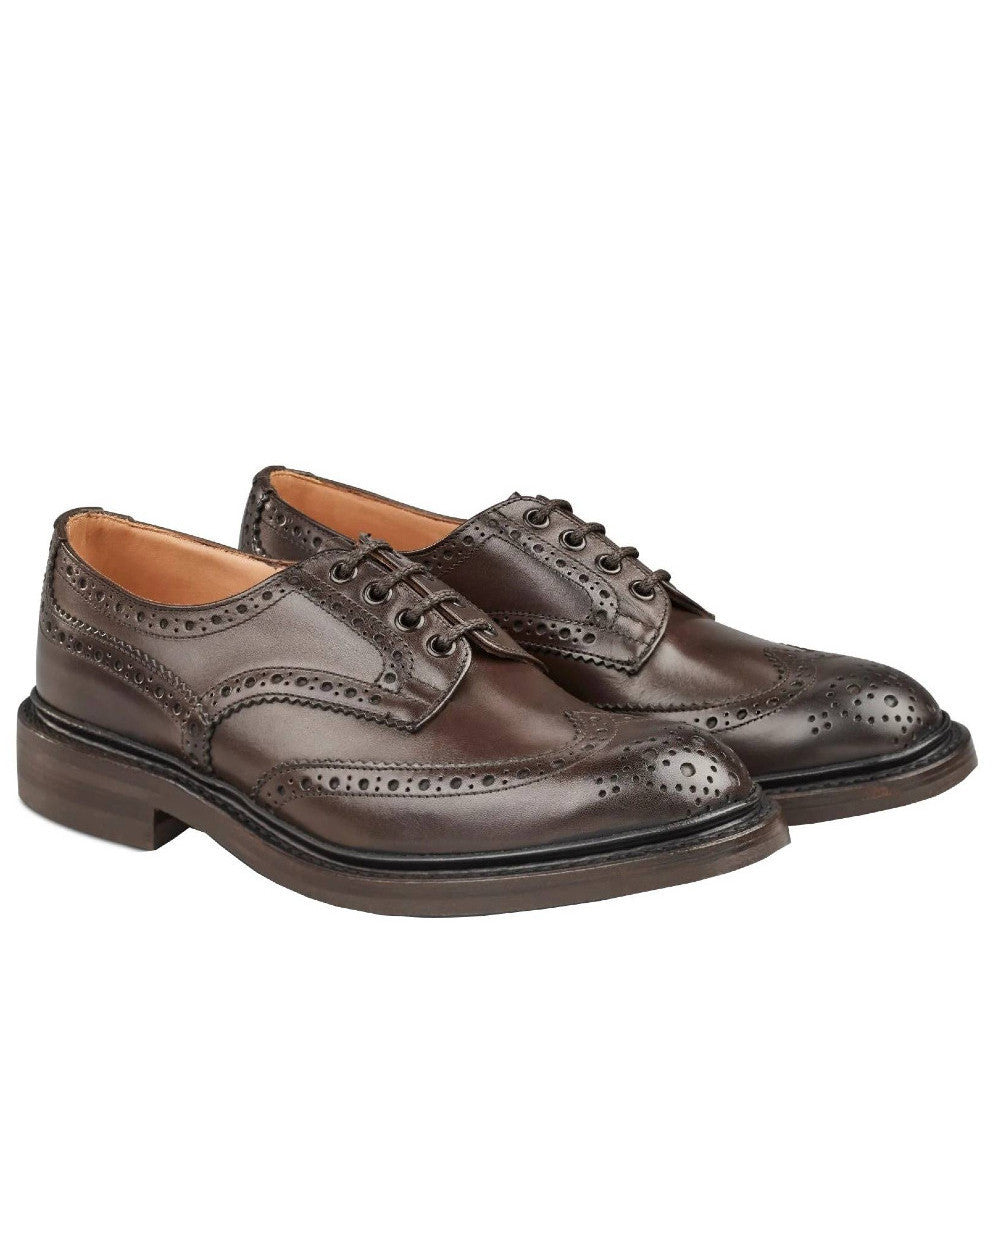 Espresso Burnished Coloured Trickers Bourton Leather Sole Country Shoe On A White Background 